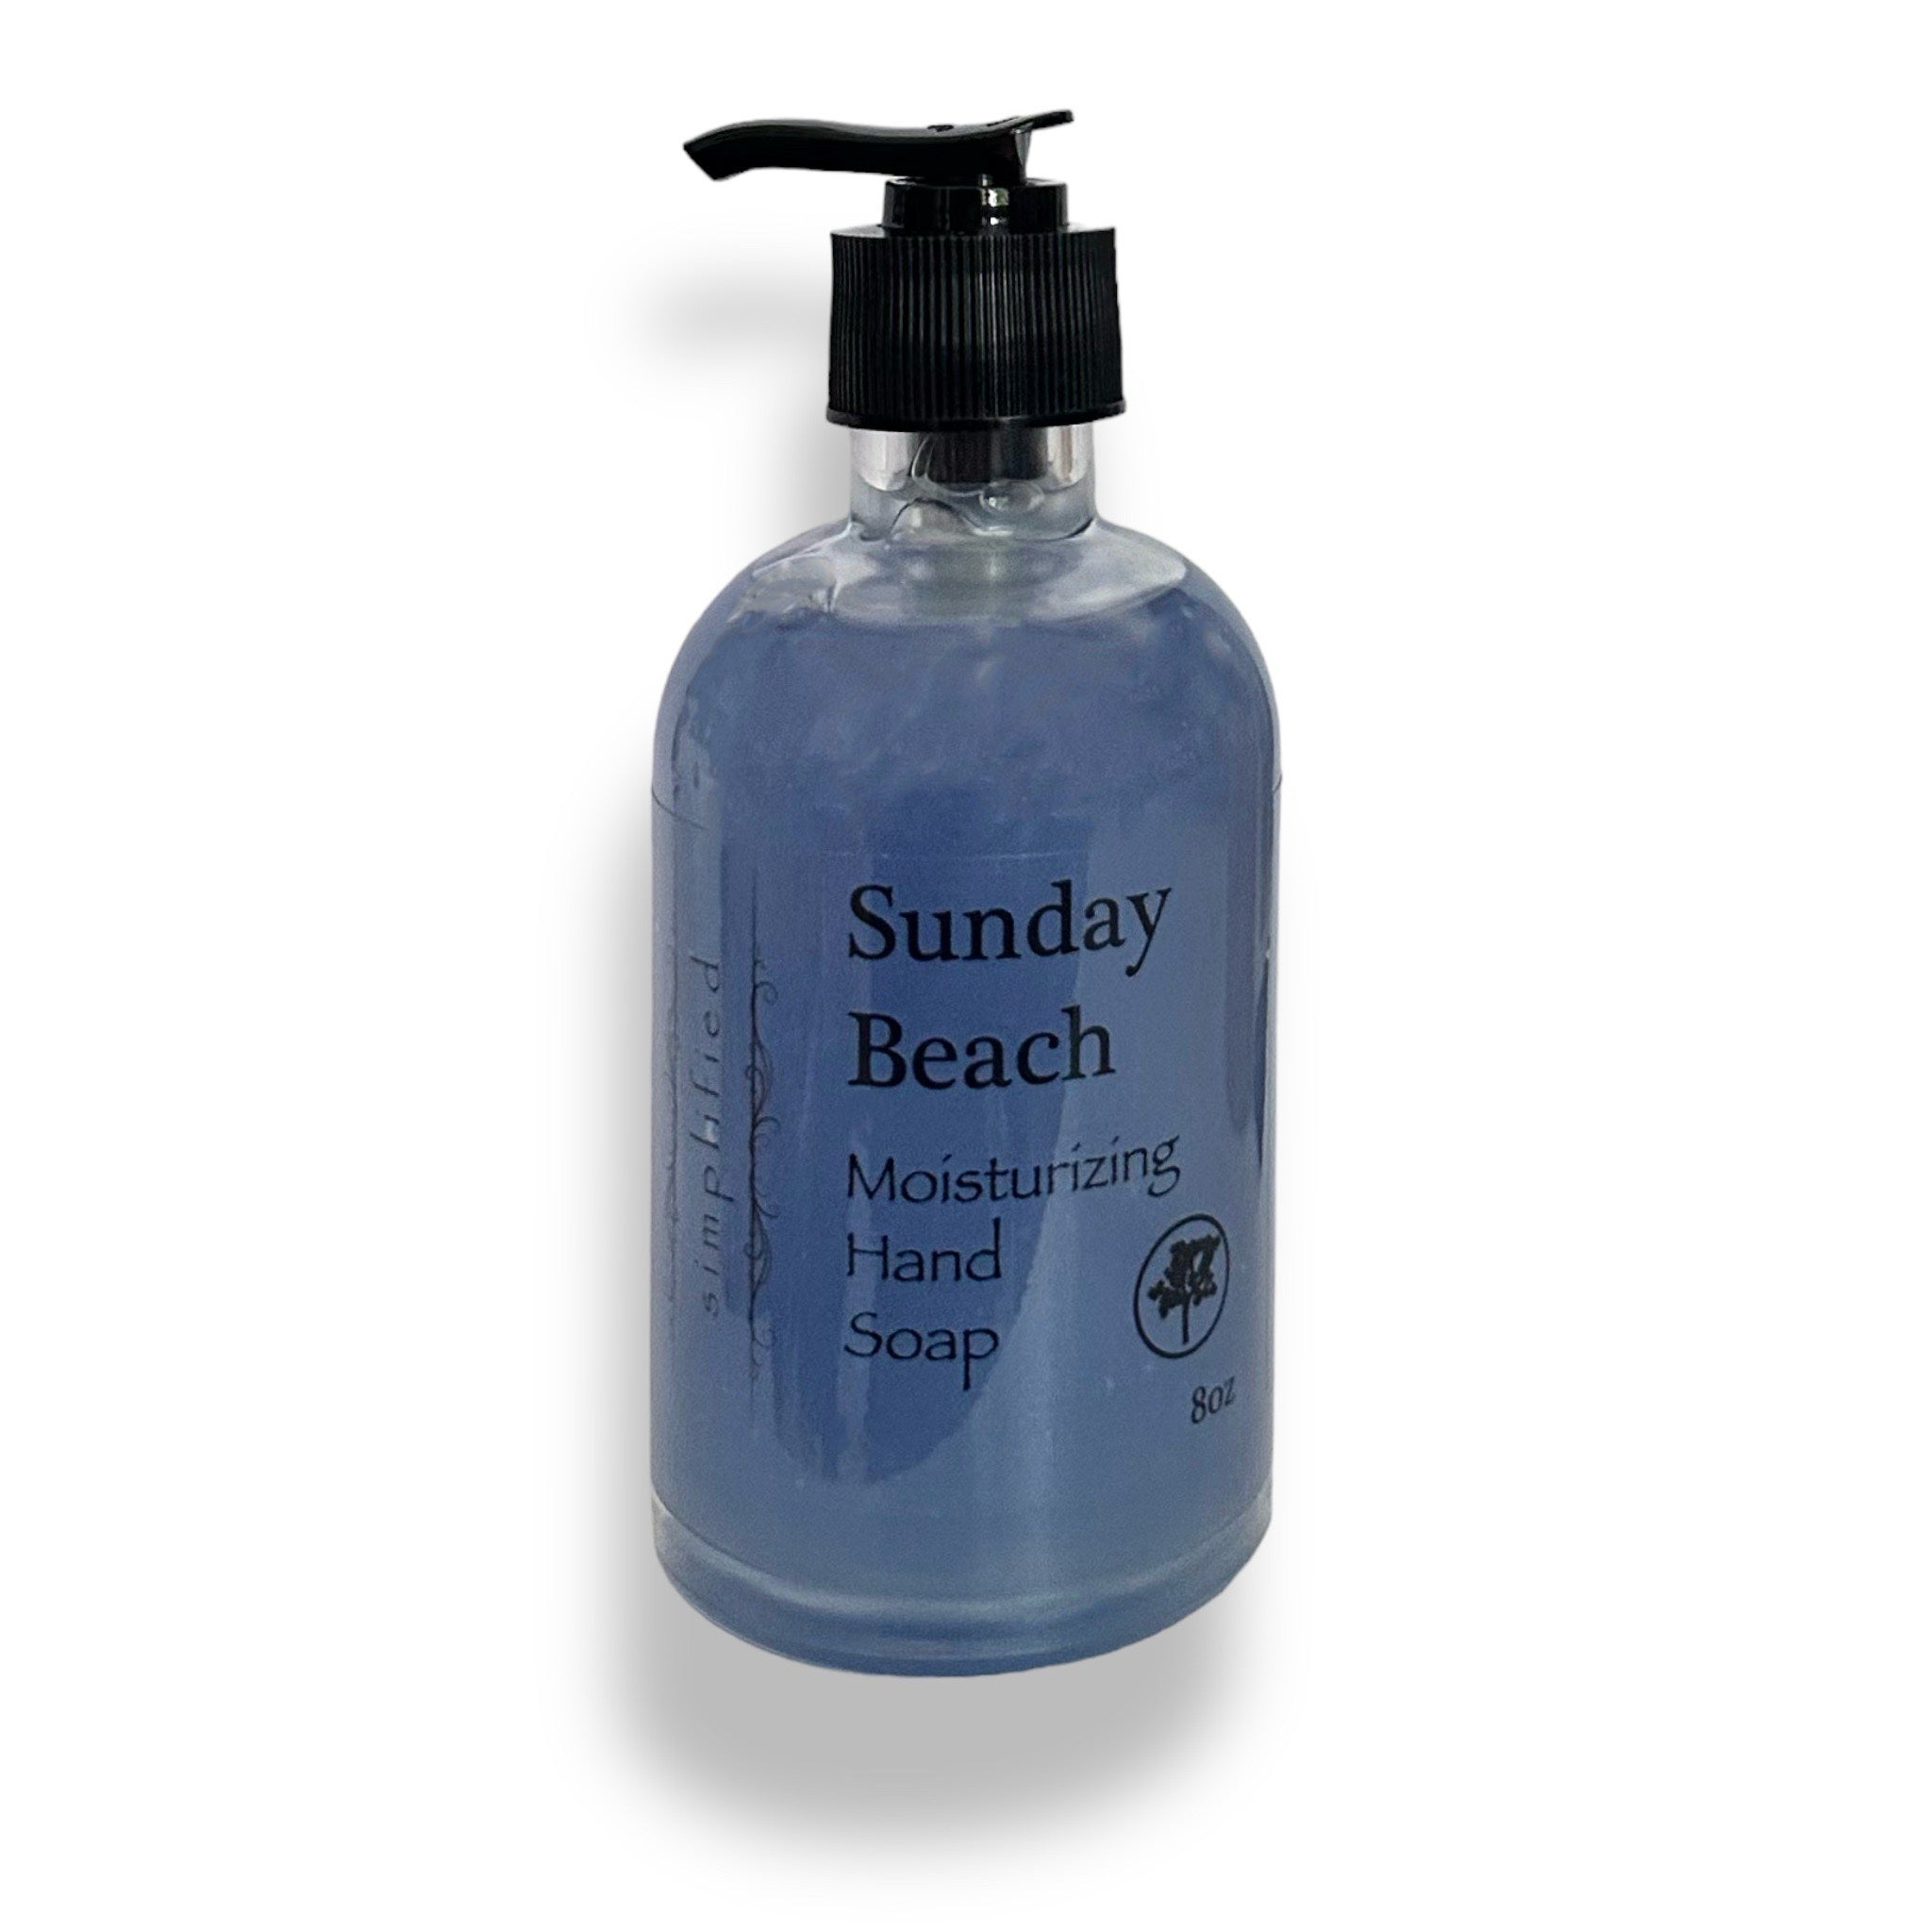 Hand Soaps by Simplified Soap - Pick Your Scent